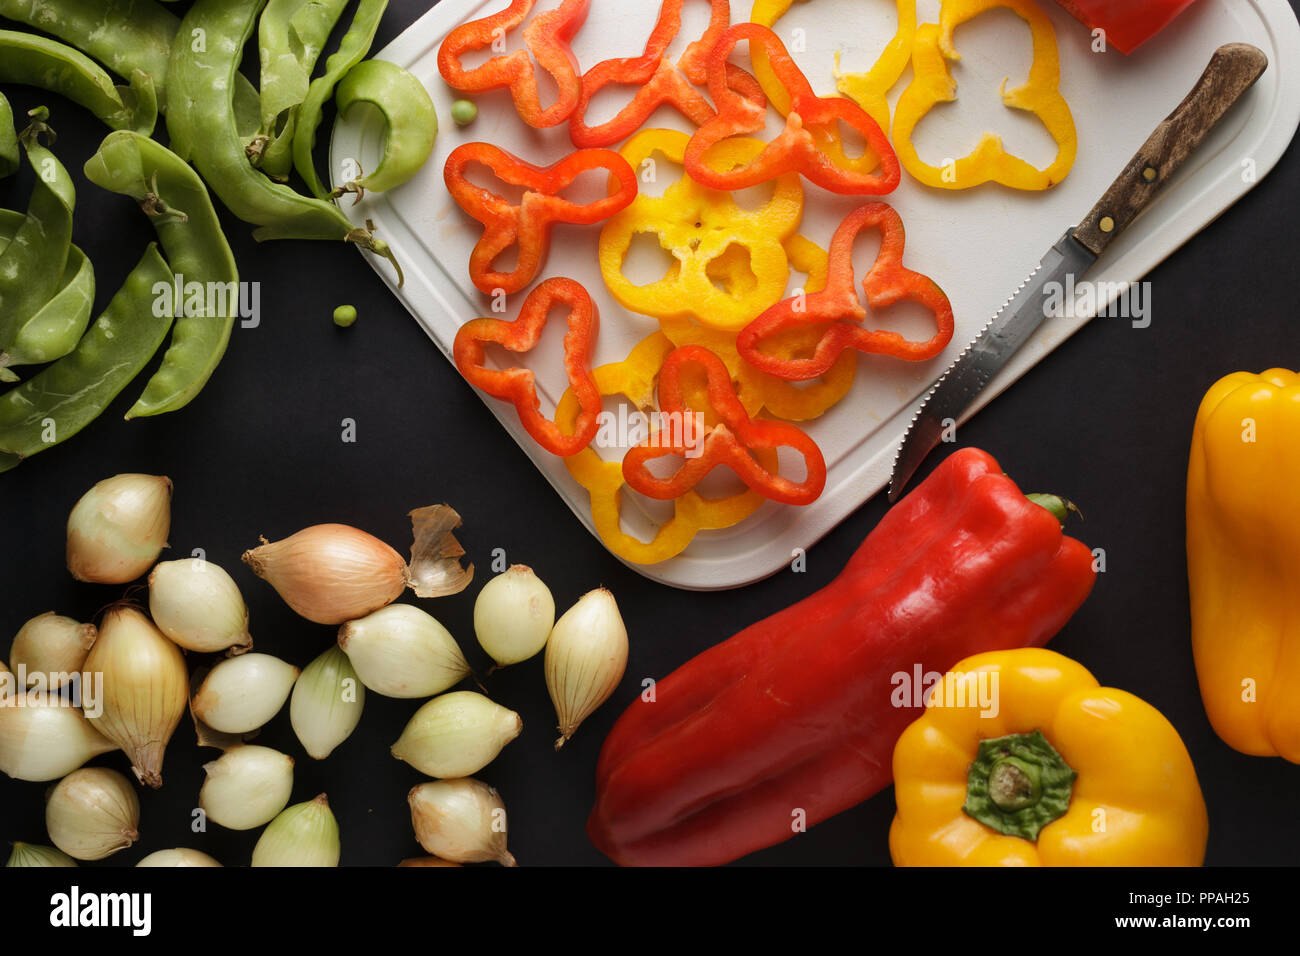 Ripe bell peppers slices on a white chopping board, surrounded by other vegetables, like onions and snow peas on a black table. Stock Photo